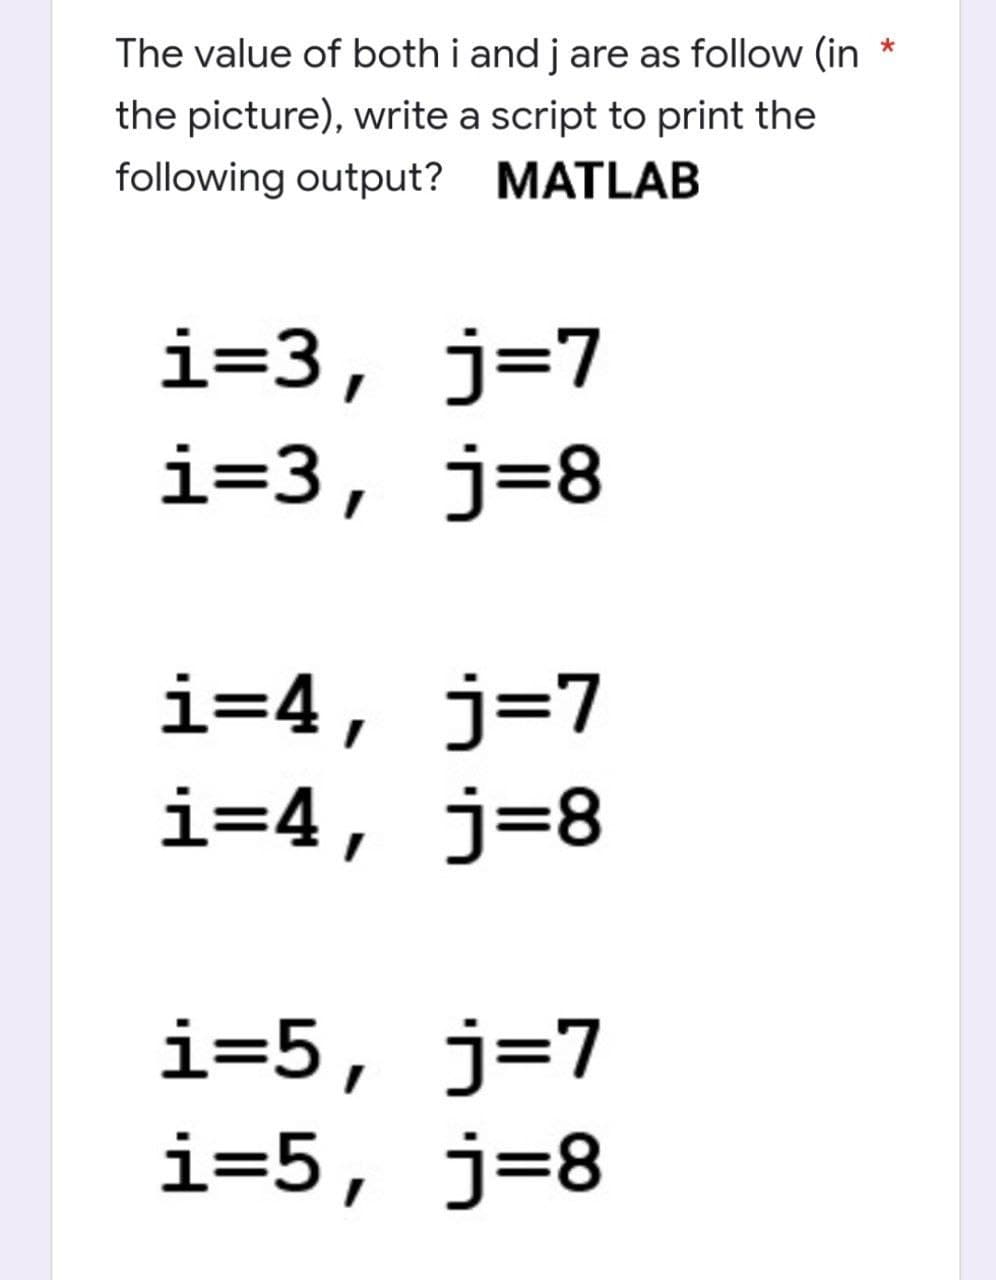 The value of both i and j are as follow (in
the picture), write a script to print the
following output? MATLAB
i=3, j=7
i=3, j=8
i=4, j=7
i=4, j=8
i=5, j=7
i=5, j=8
*